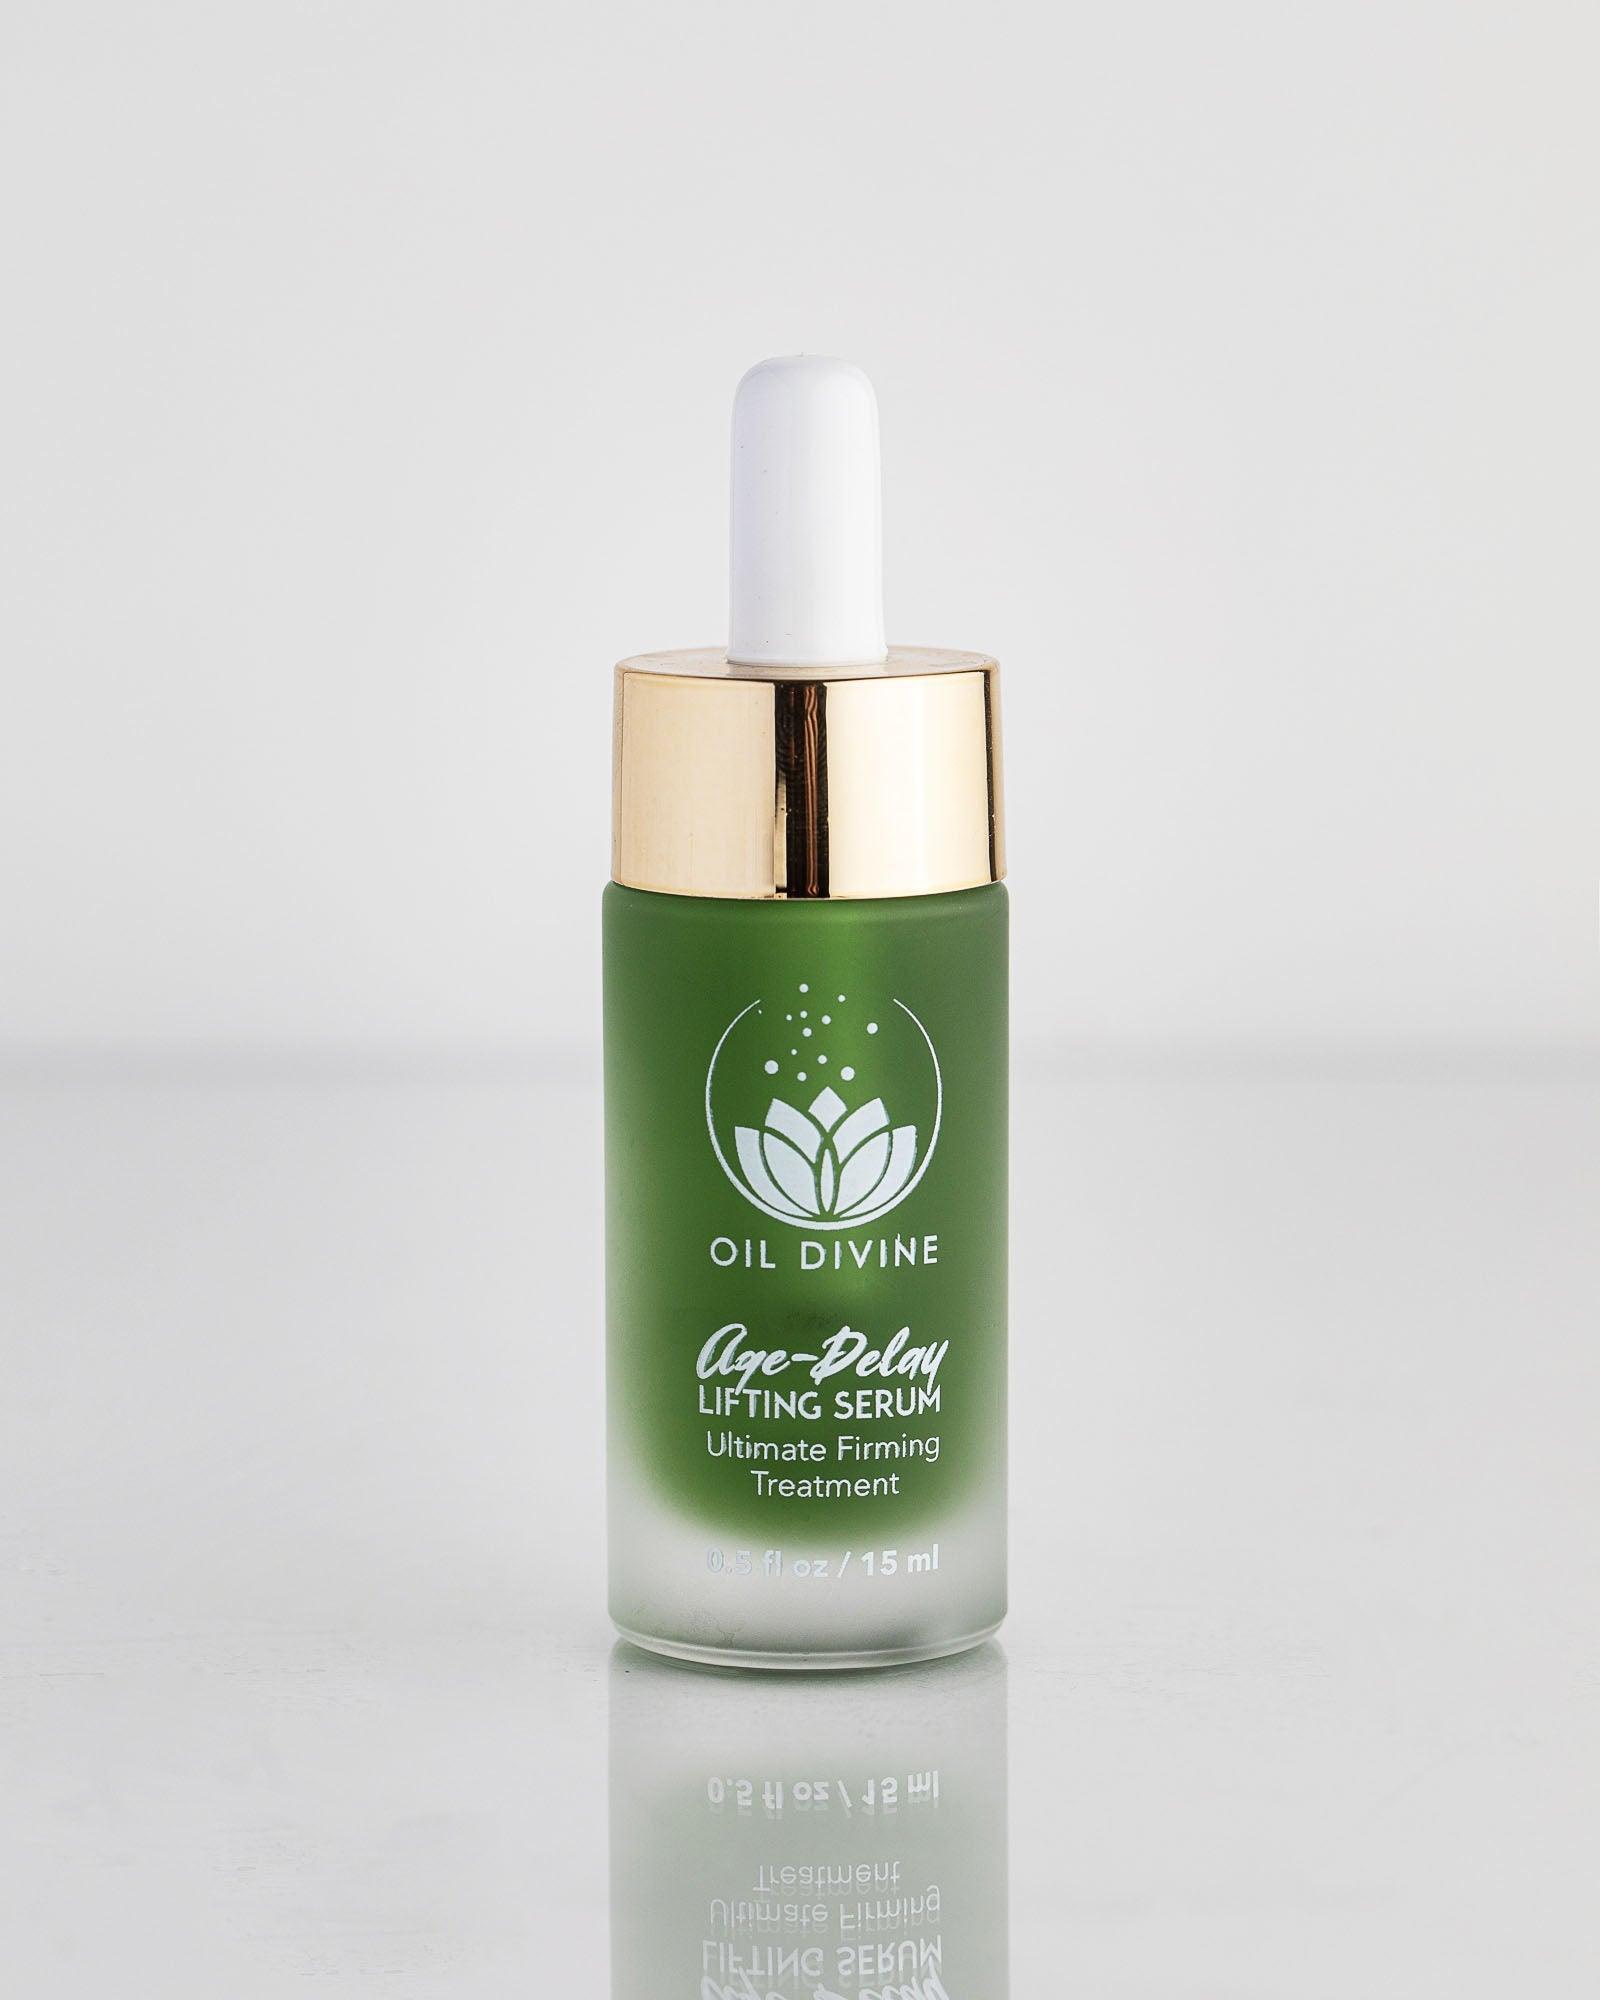 Age-Delay Lifting Serum by Oil Divine - Vysn